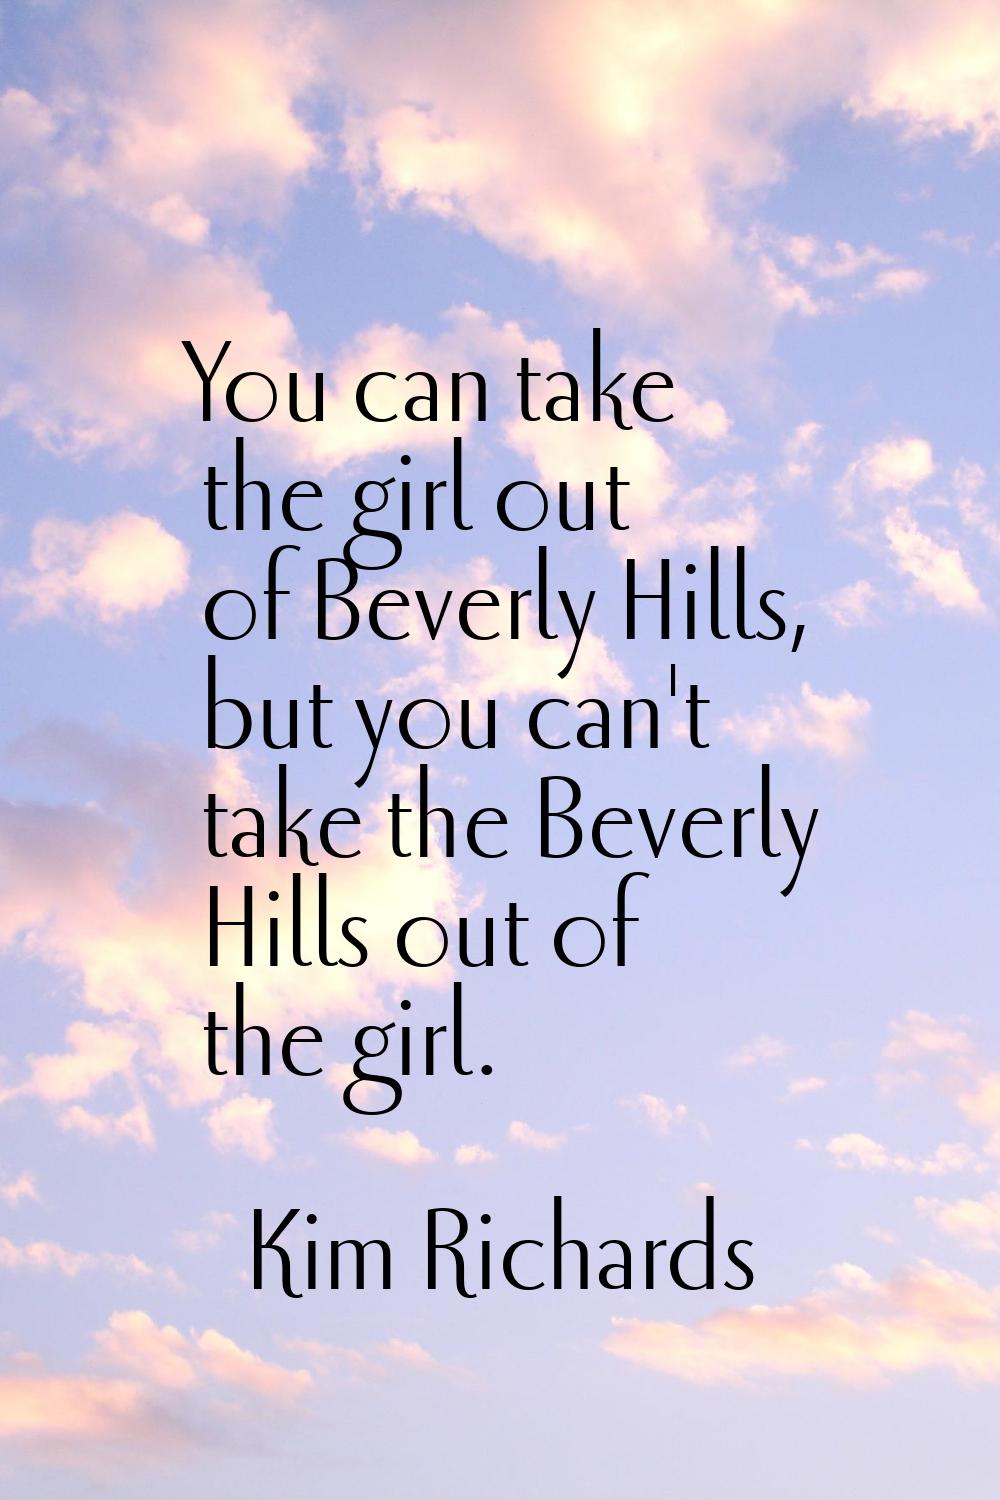 You can take the girl out of Beverly Hills, but you can't take the Beverly Hills out of the girl.